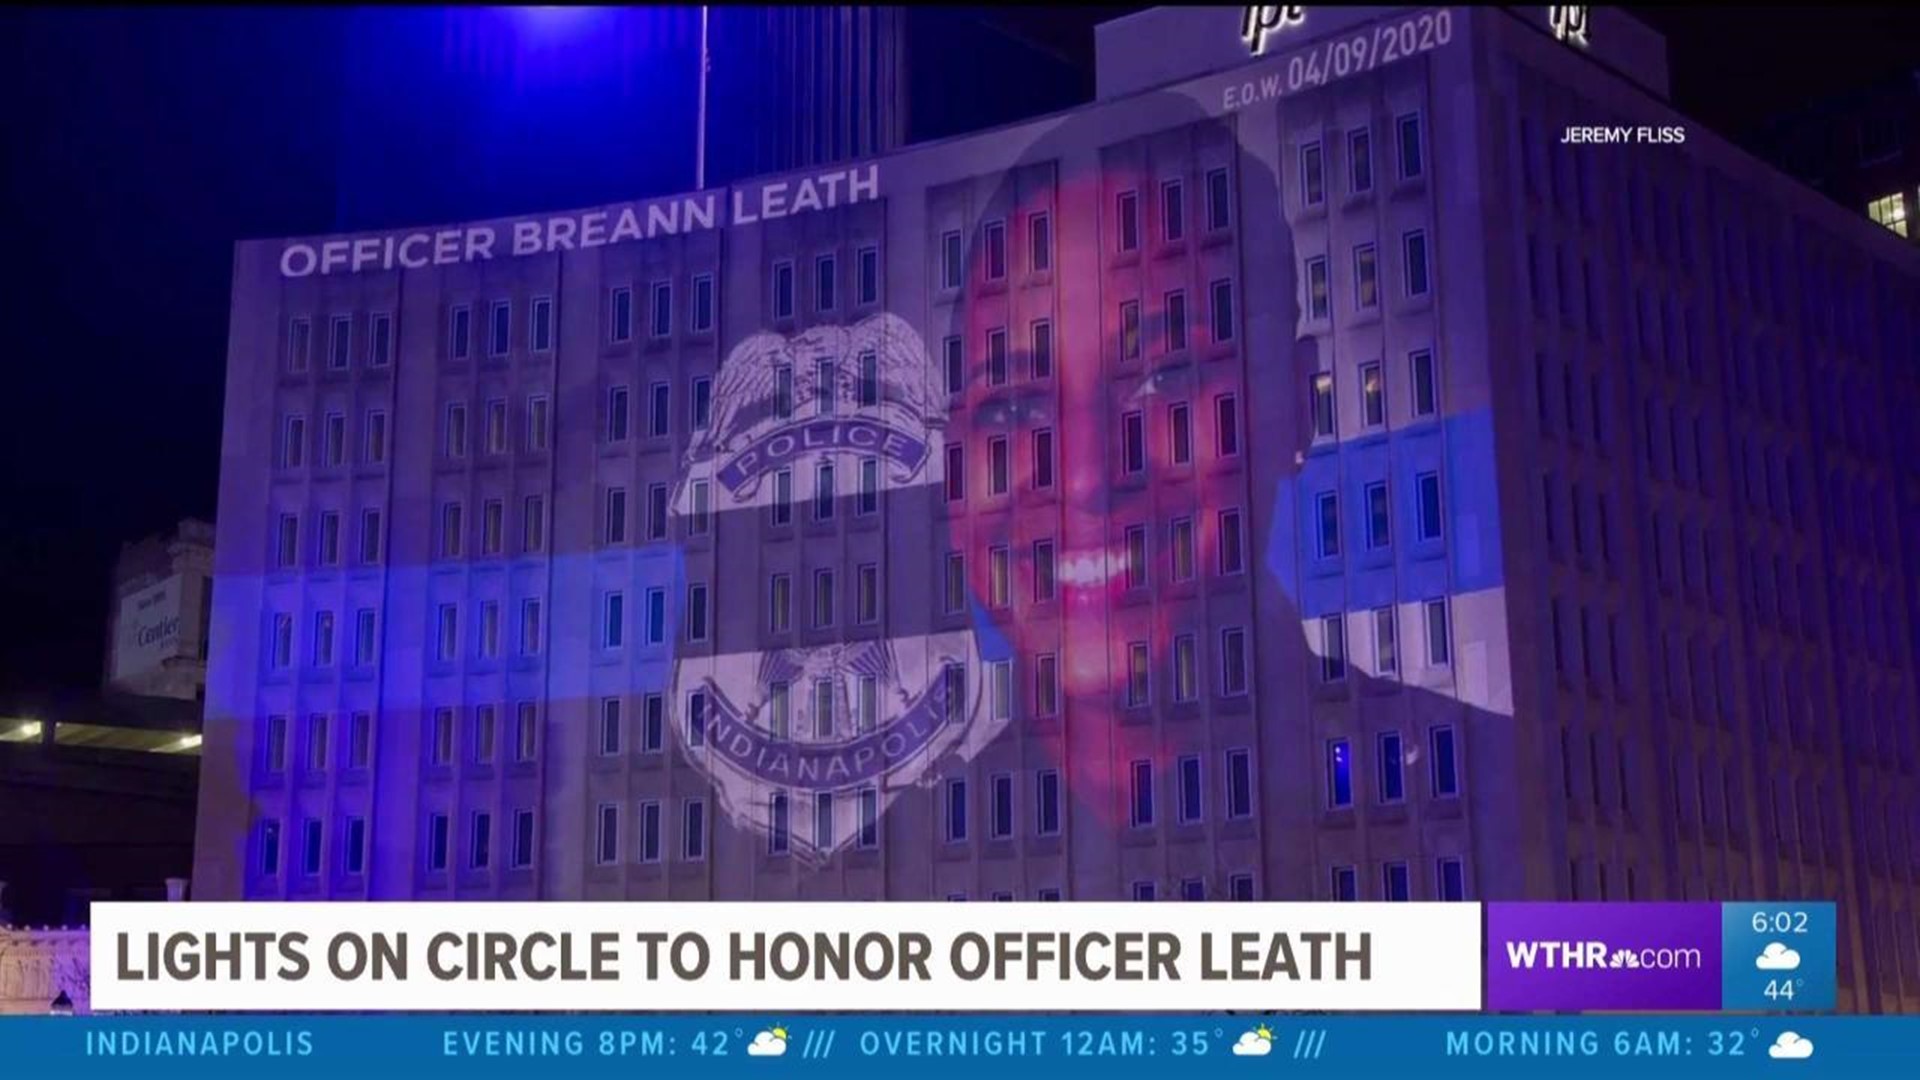 Officer Leath's memorial services announced